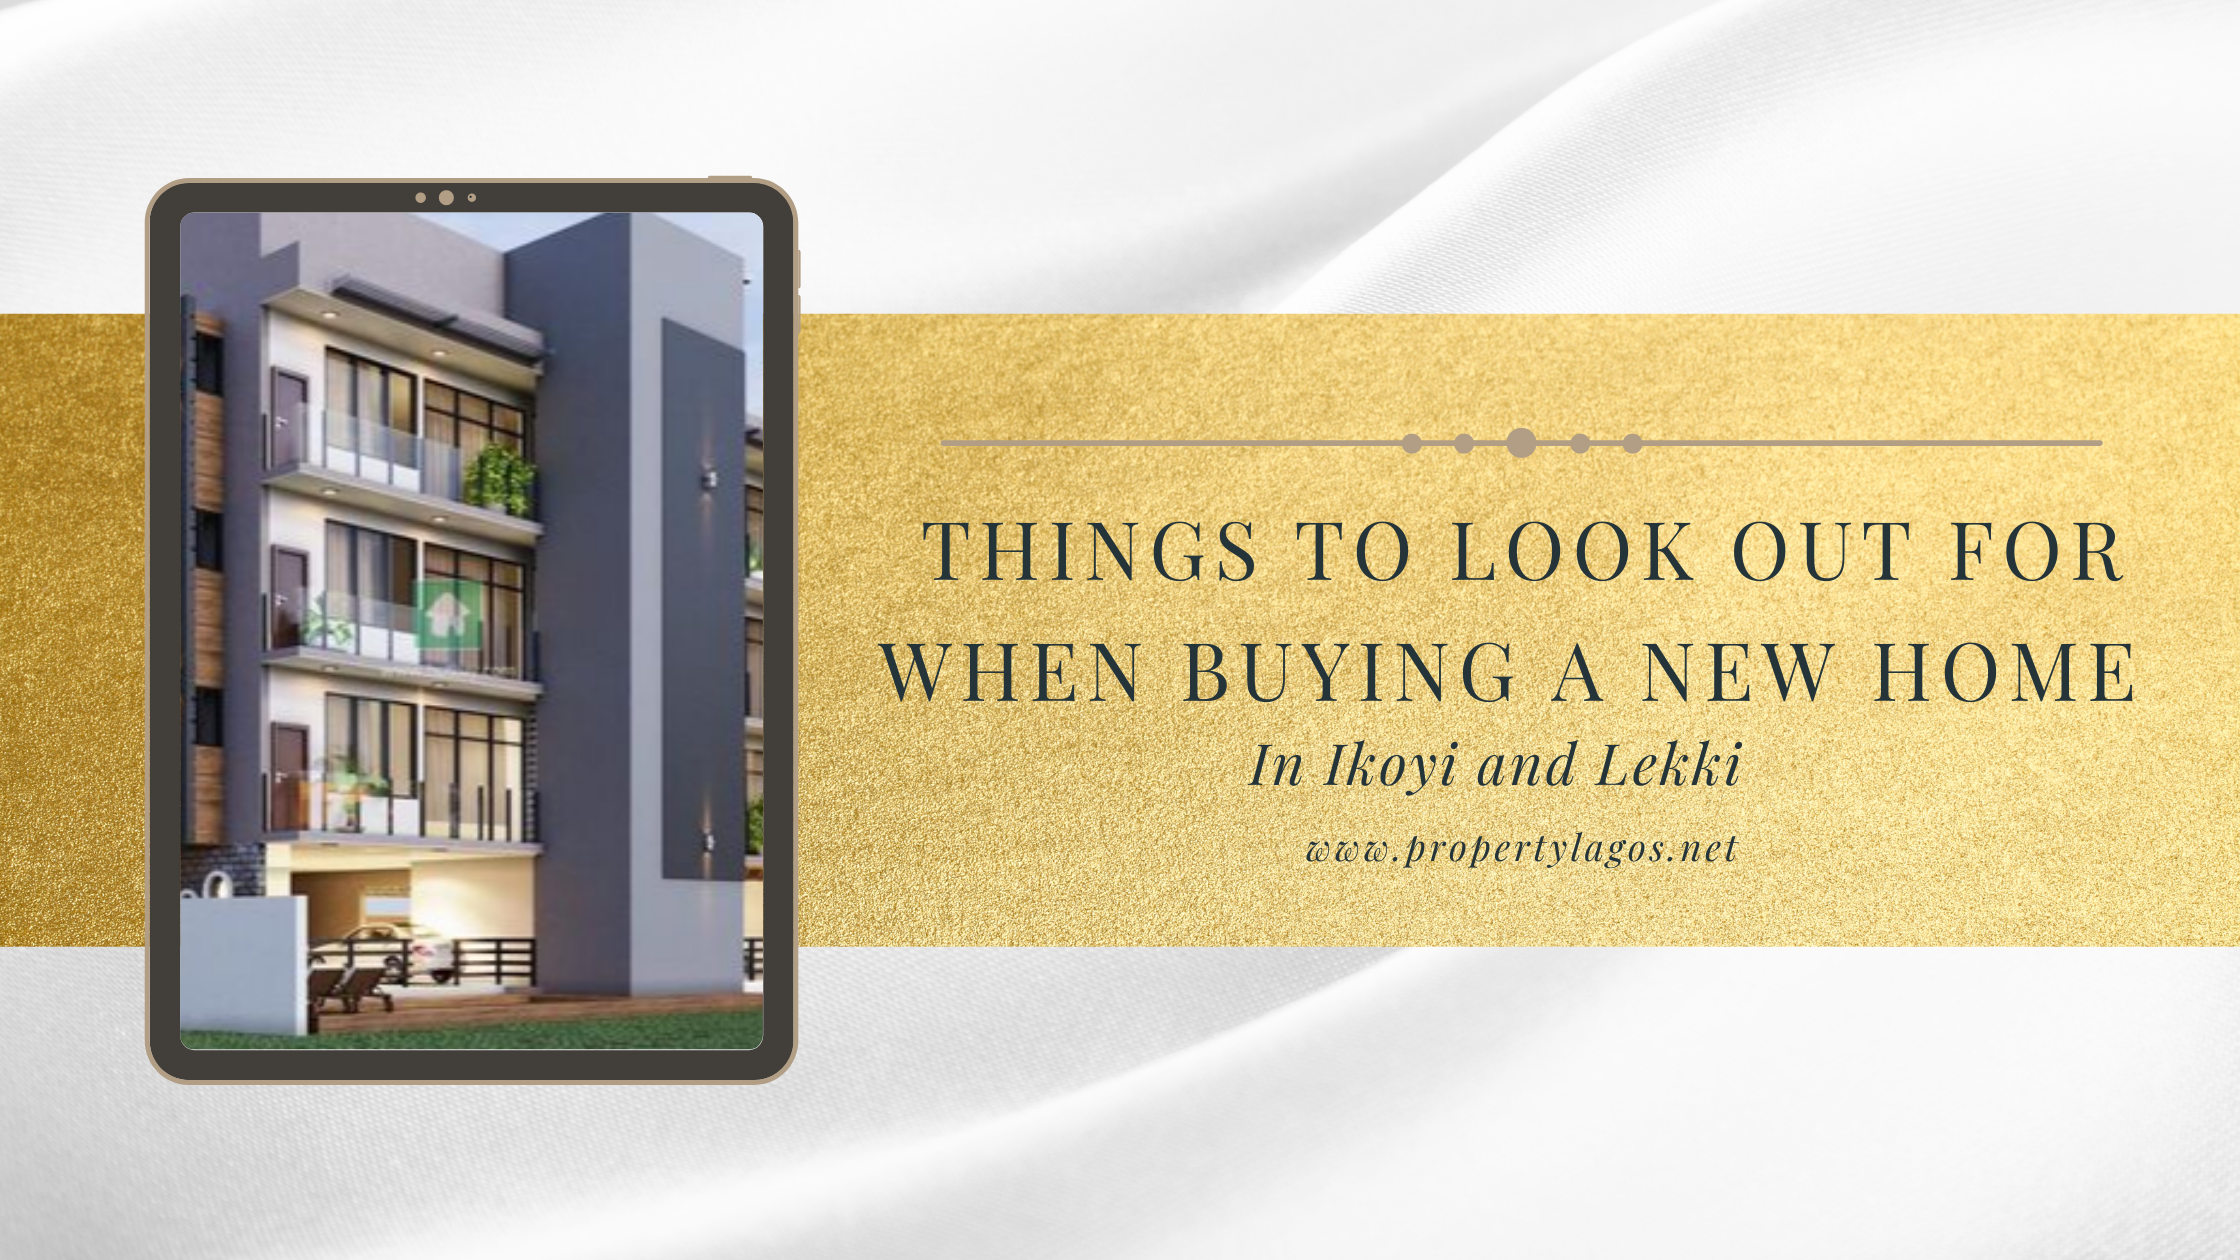 Things to look out for when buying a new home in Ikoyi and Lekki